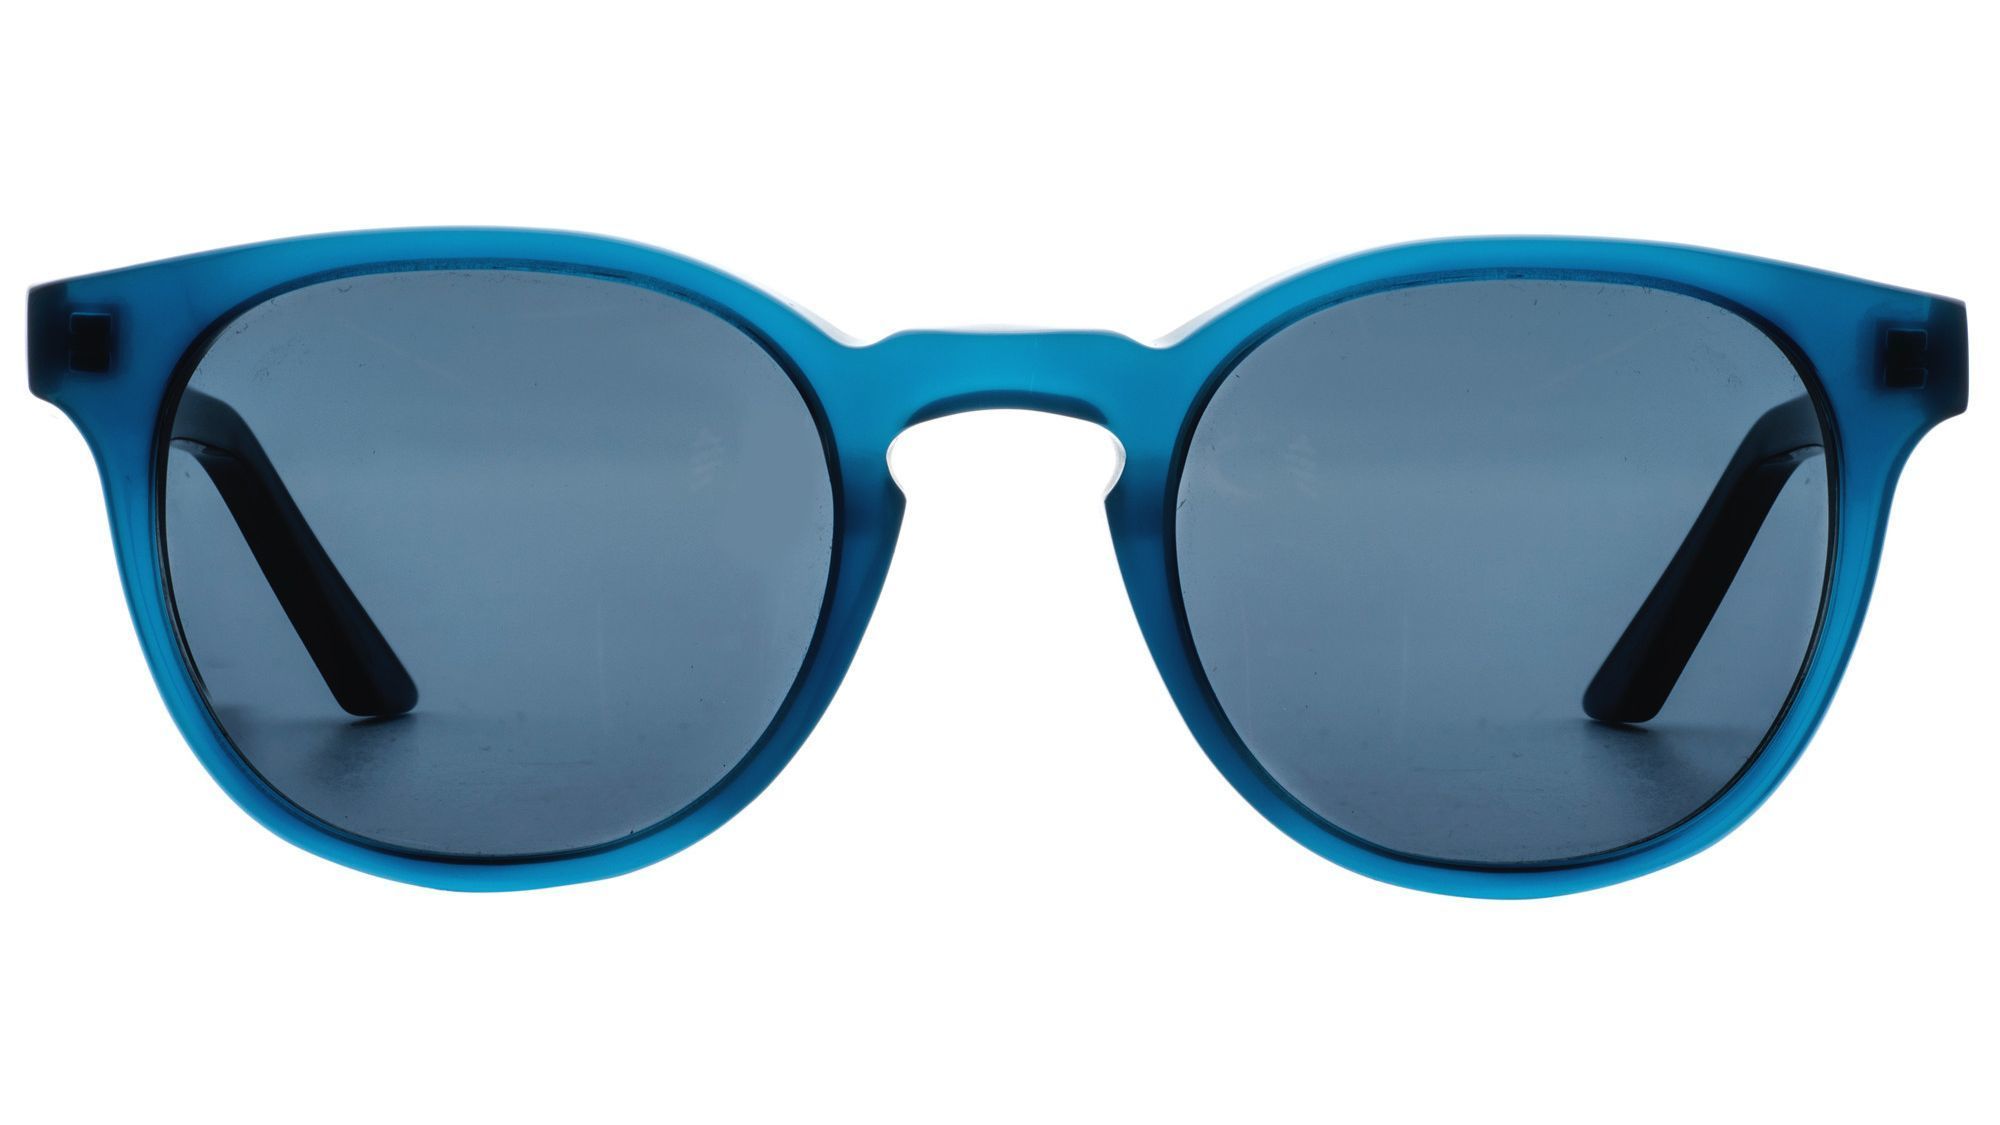 The limited-edition Marlton shades from American Trench X Lowercase NYC.